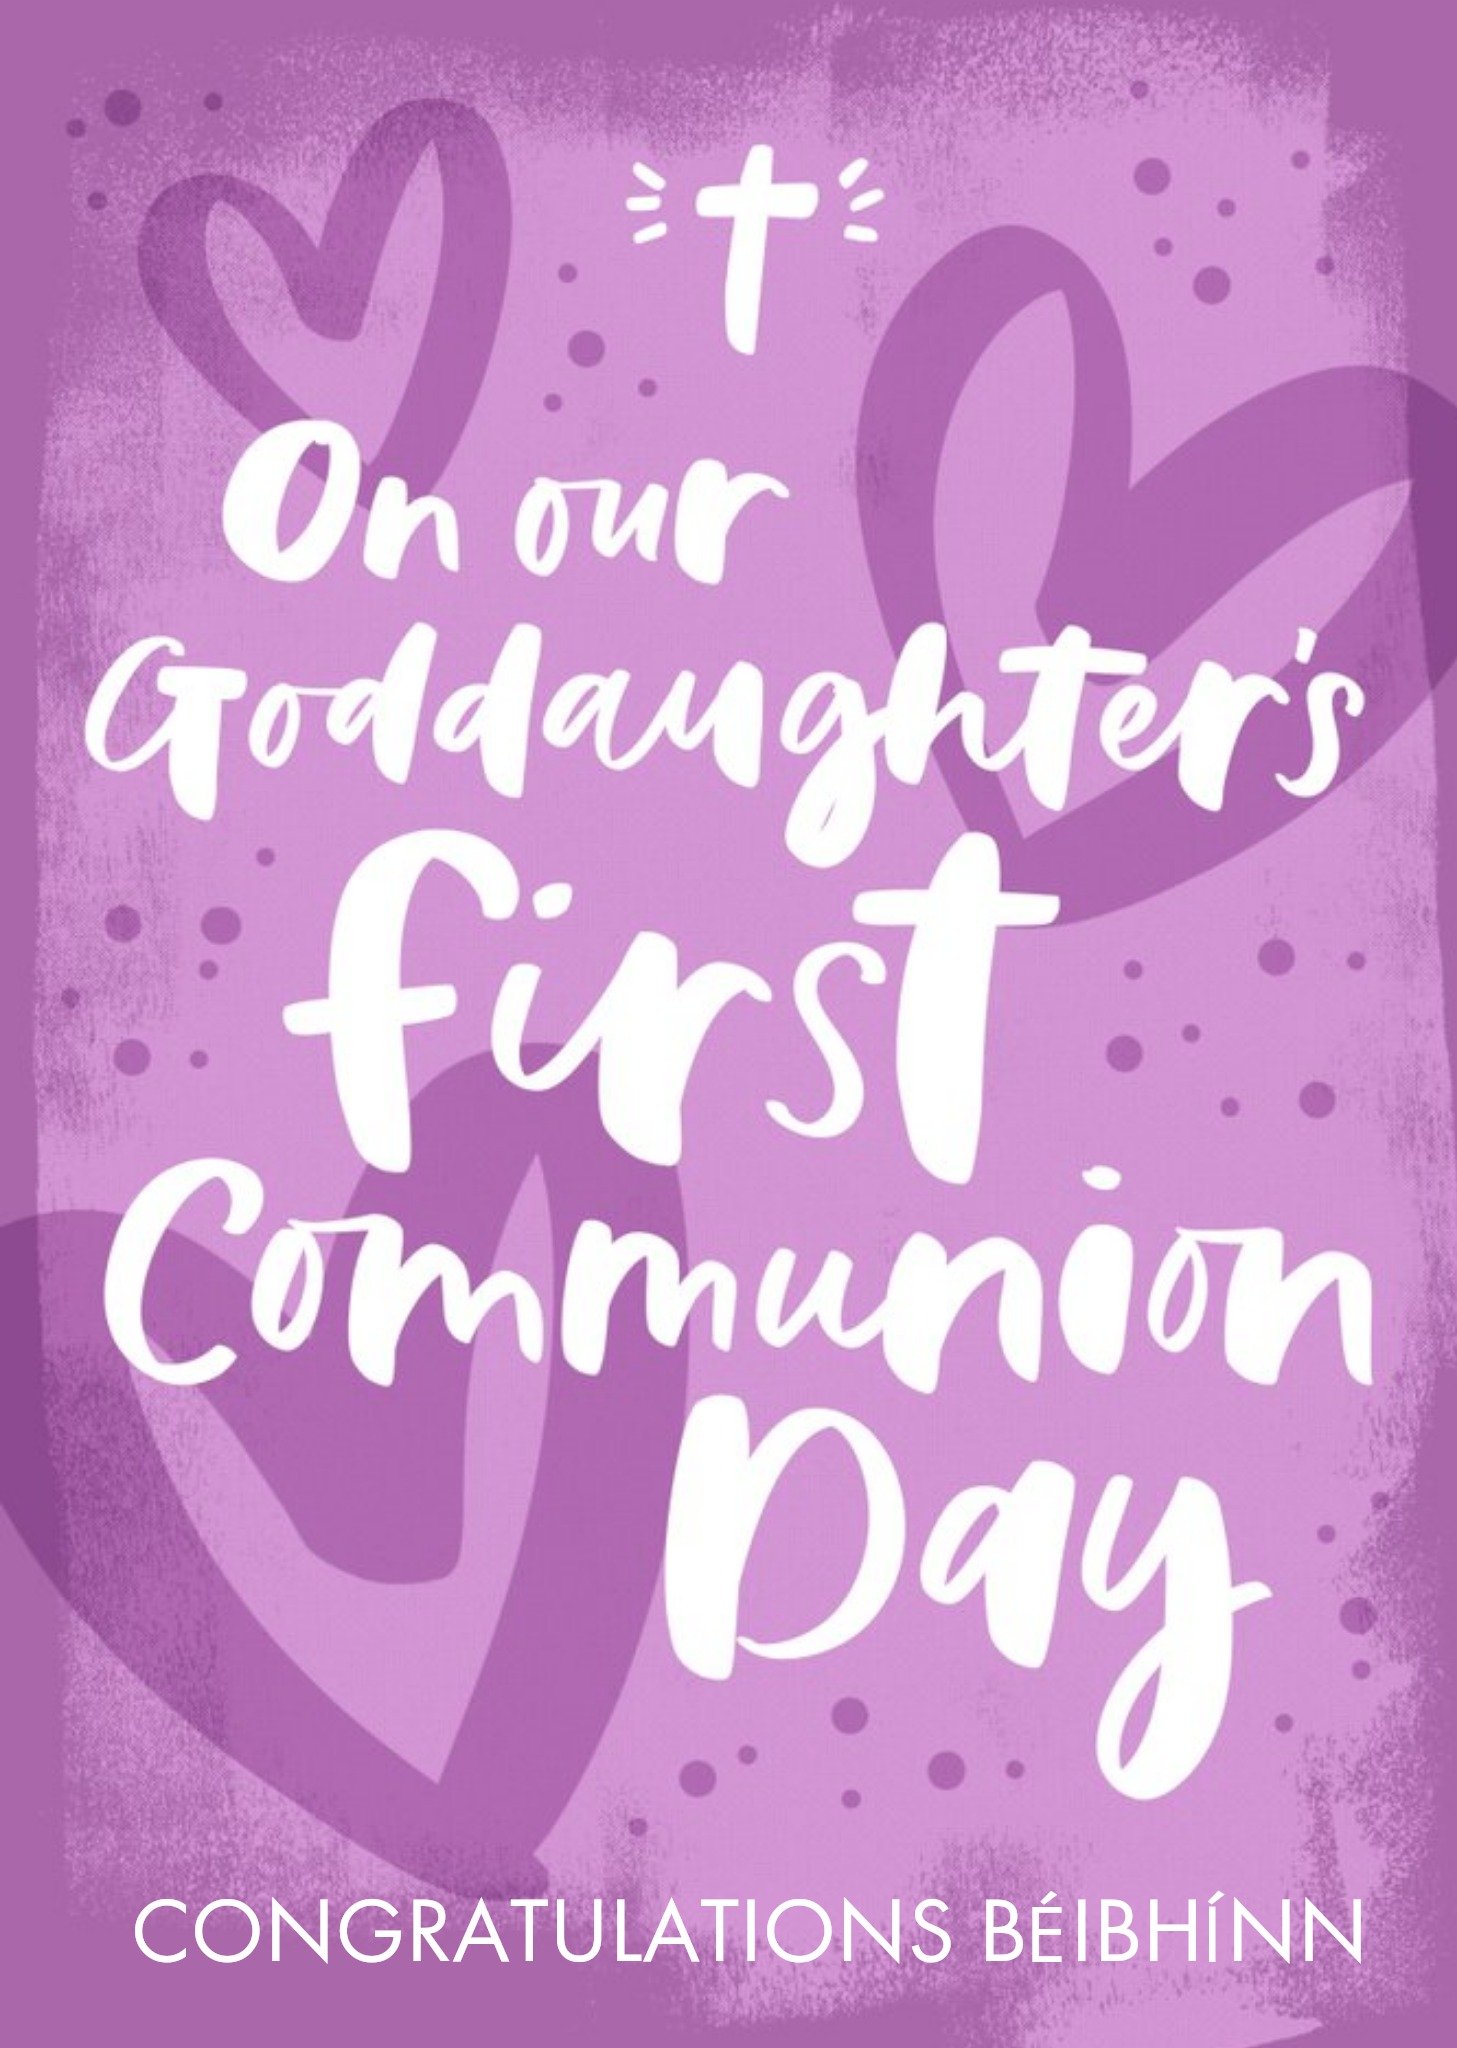 Moonpig Handwritten Typography On A Purple Background With Hearts Goddaughter's First Communion Day 